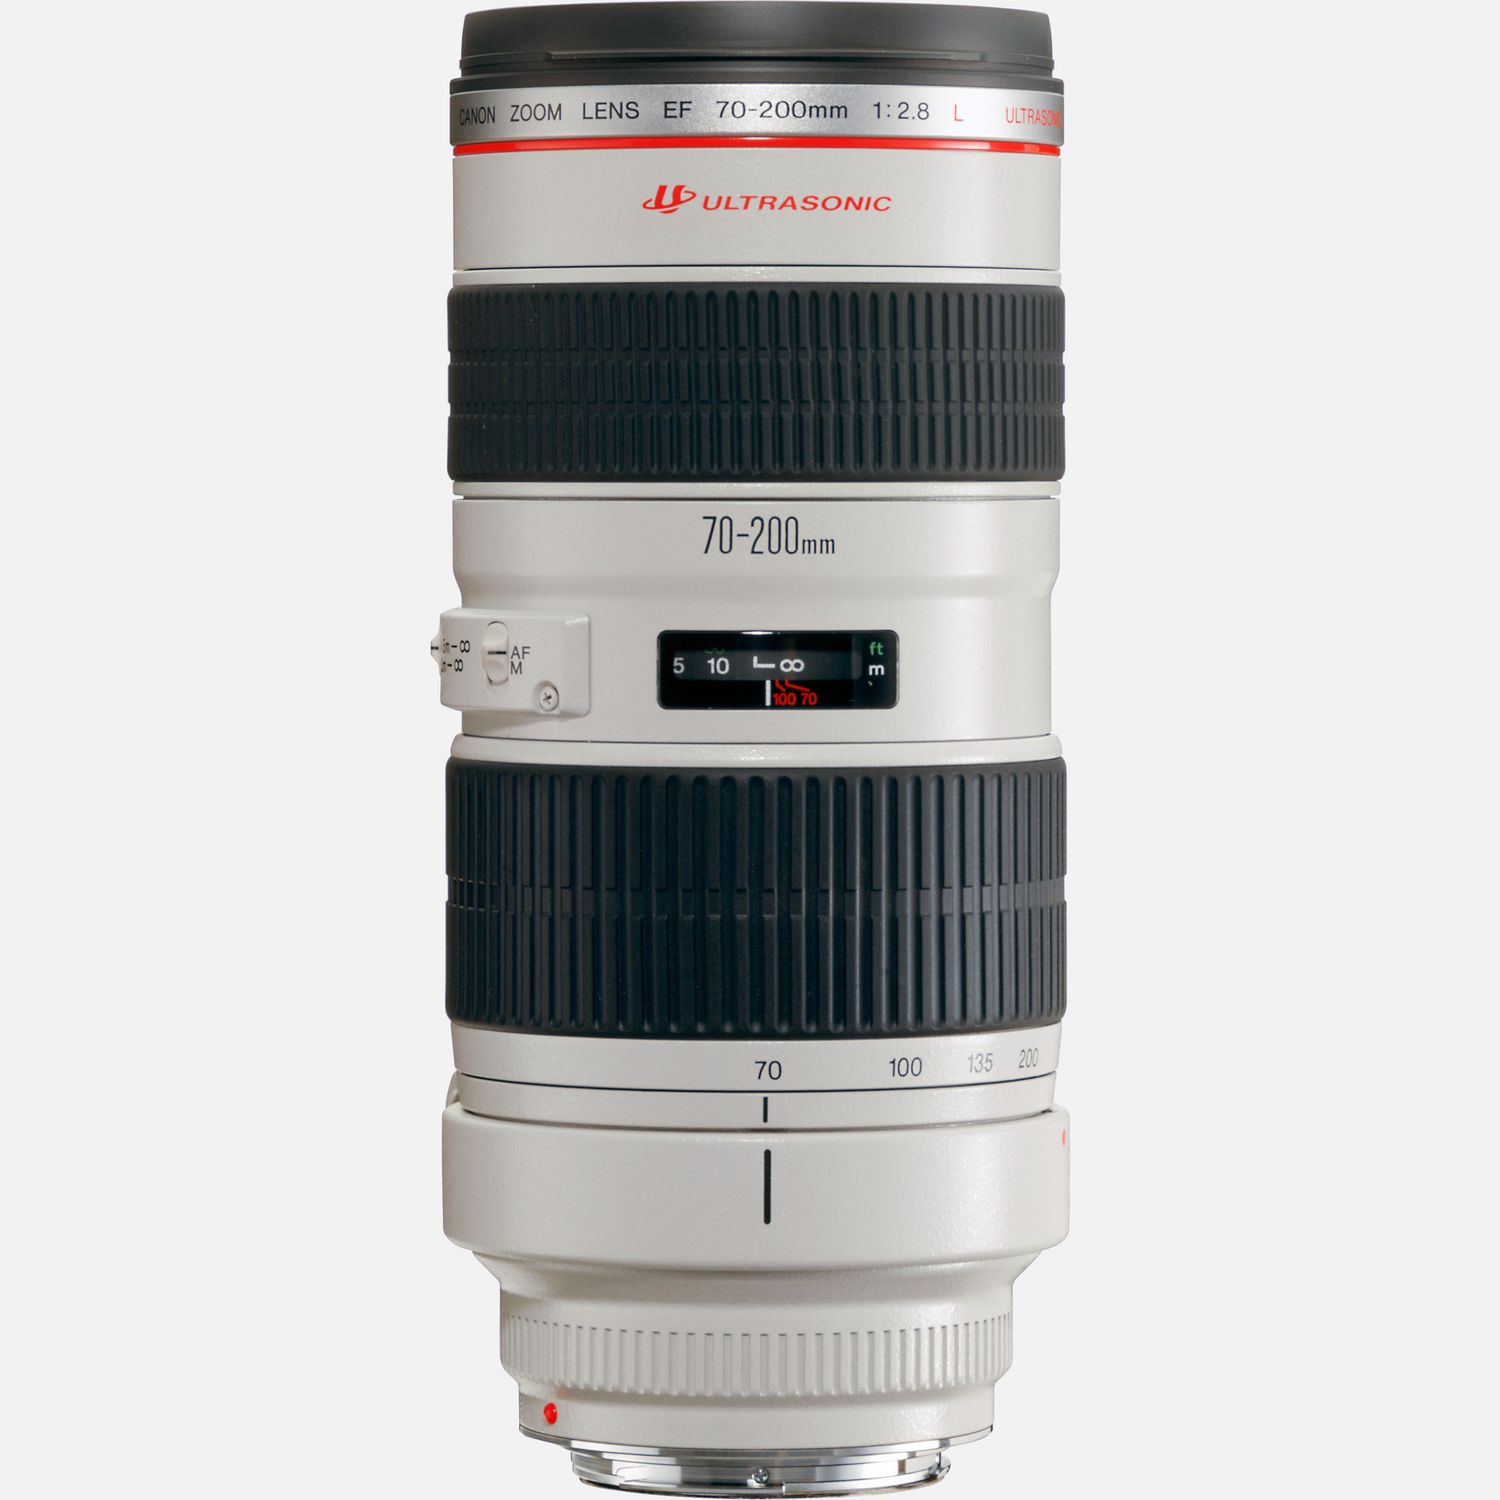 Canon EF 70-200mm f/2.8L USM Lens in Discontinued at Canon